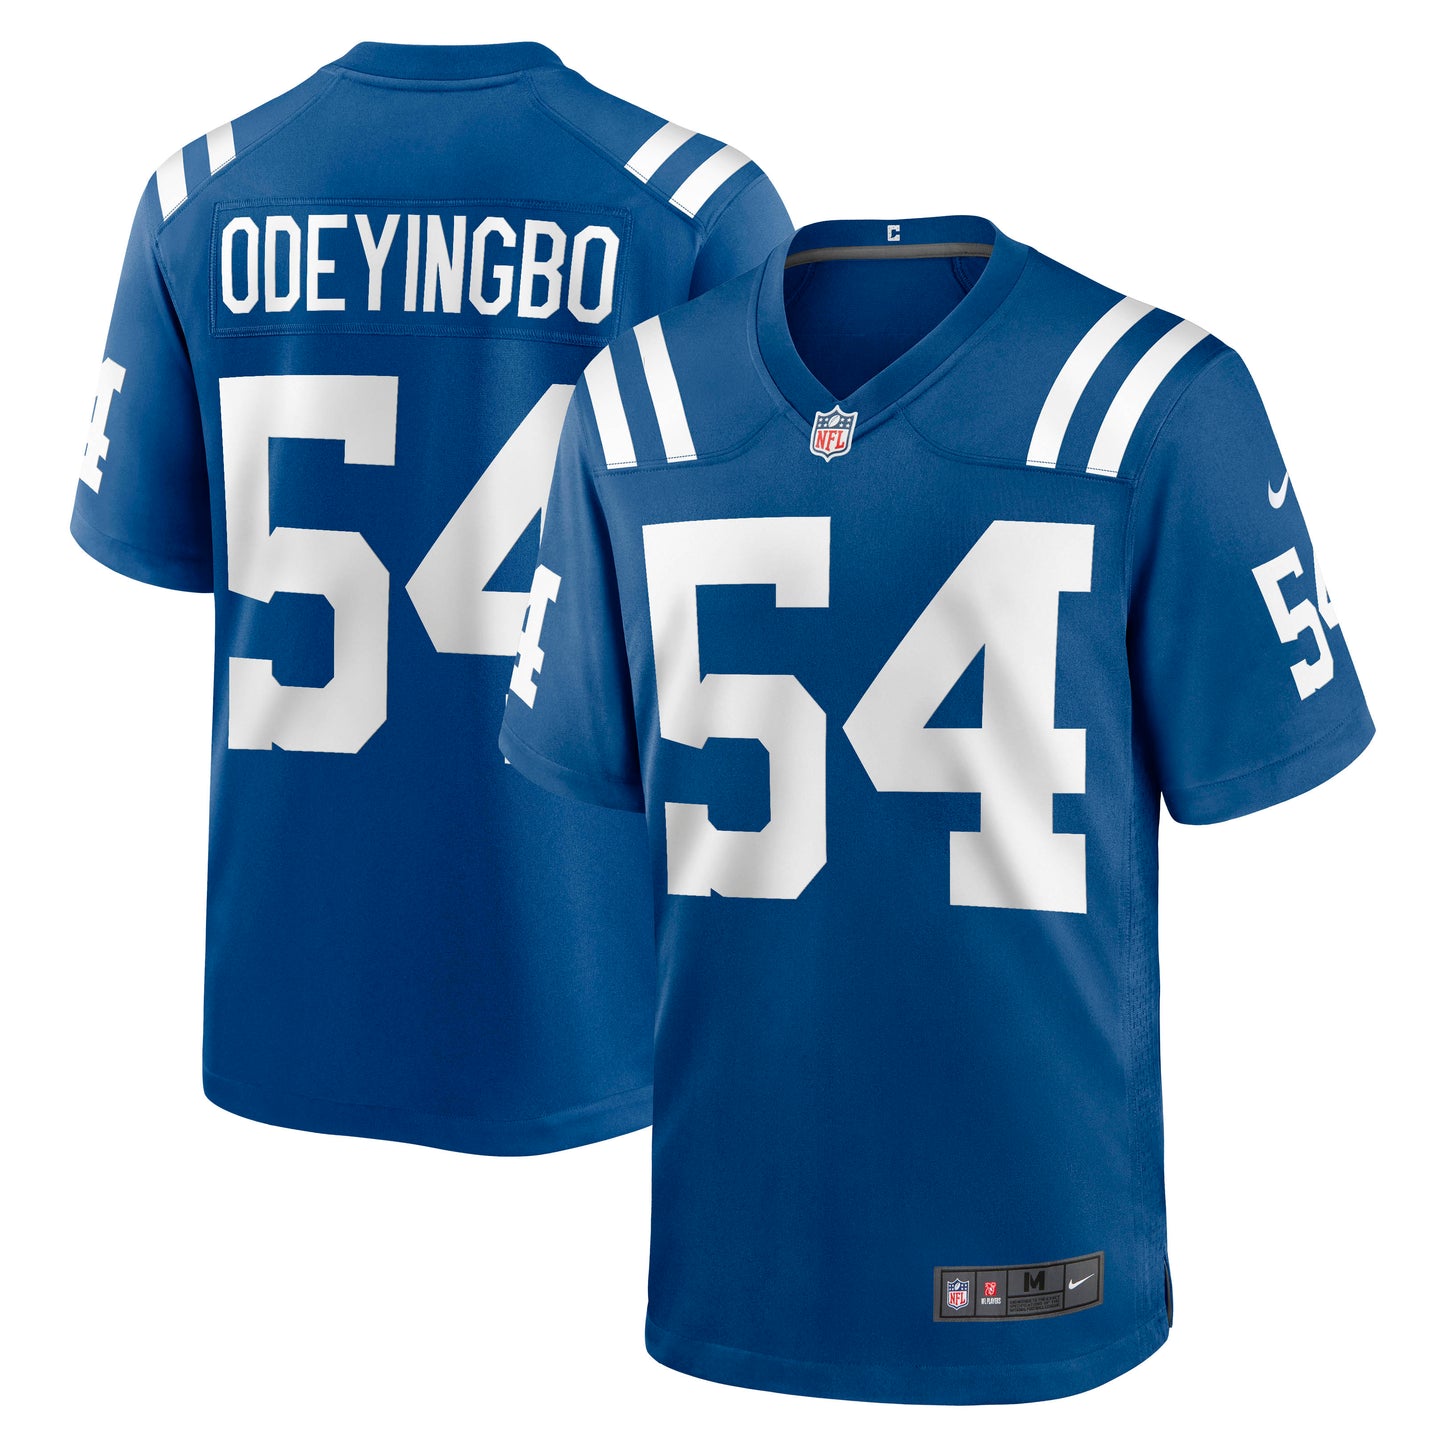 Dayo Odeyingbo Indianapolis Colts Nike Game Jersey - Royal